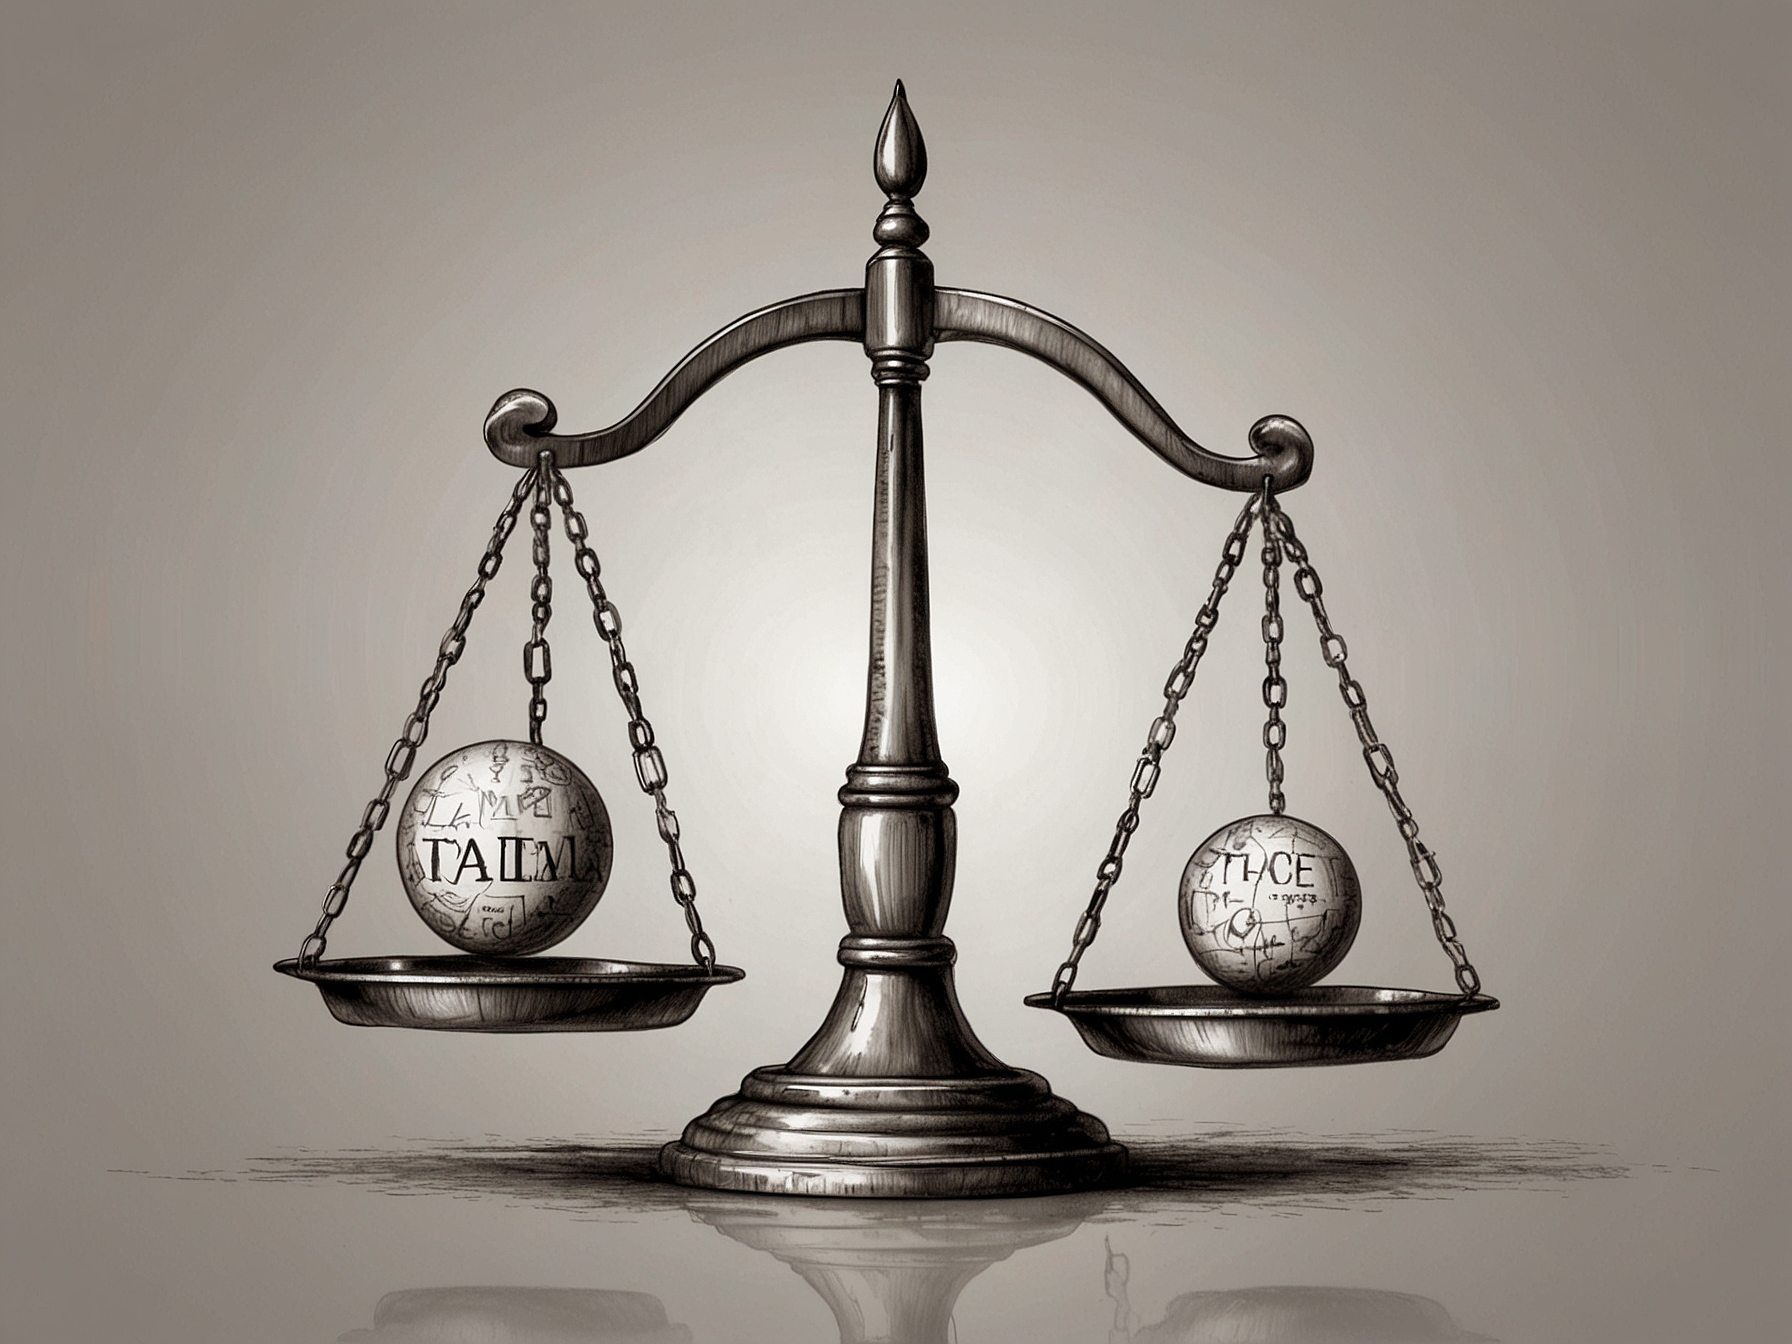 A graphic showing a balanced scale with 'Media' on one side and 'Fact-checkers' on the other, representing the need for impartiality and accountability in both sectors.